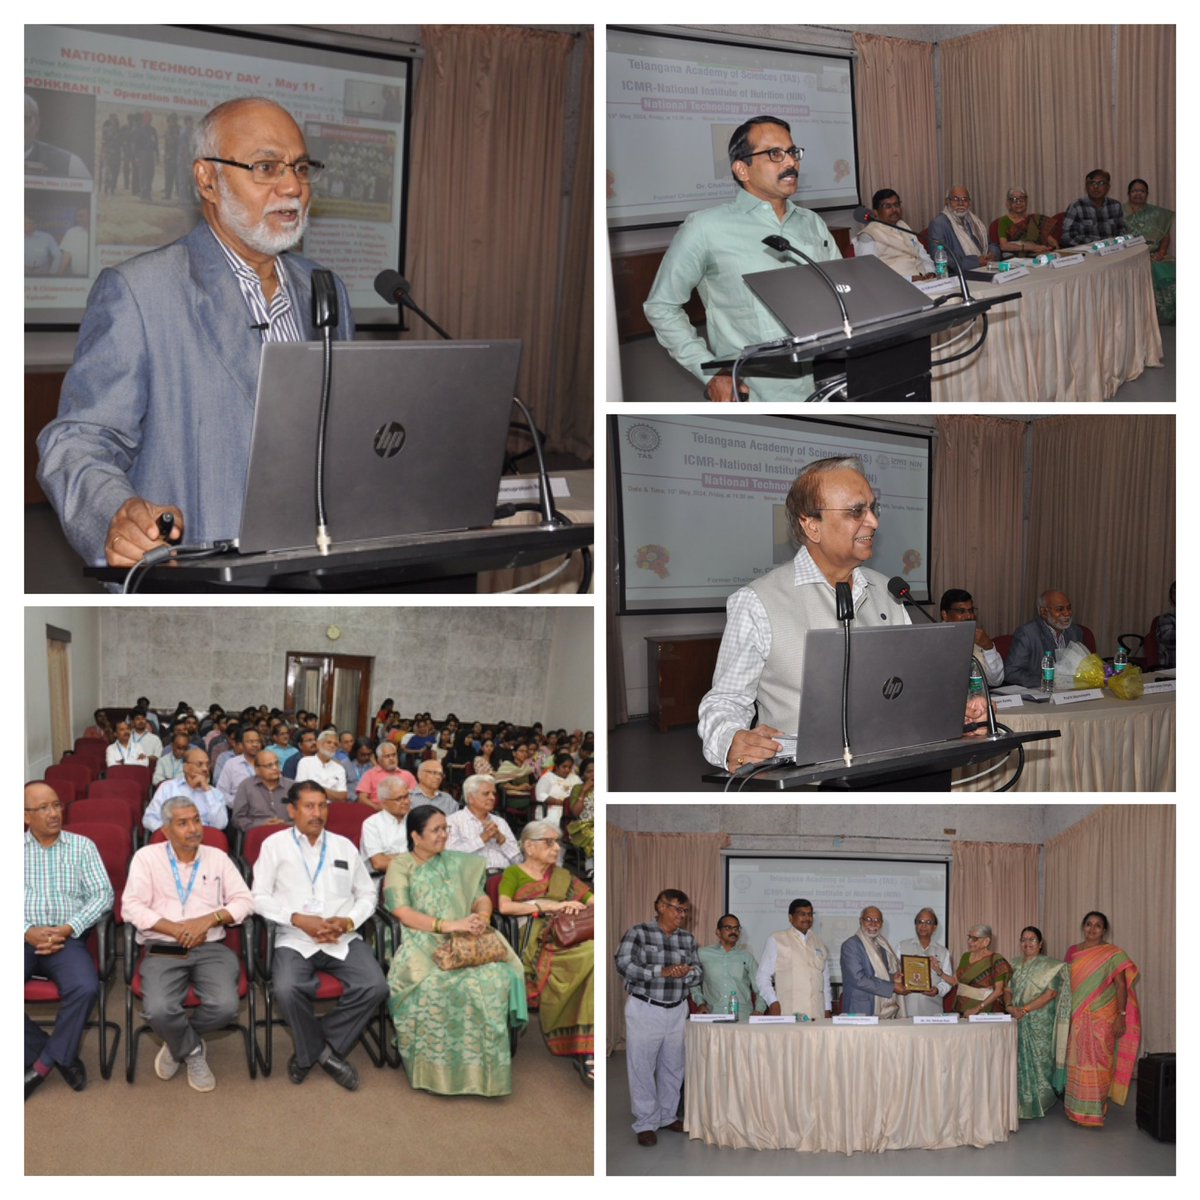 Celebrated #NationalTechnologyDay2024 in association with Telangana Academy of Sciences. Dr Chaitanyamoy Ganguly, former Chairman & Chief Executive, Nuclear Fuel Complex, @DAEIndia delivered the Technology Day talk @ICMRDELHI @NINDirector @MoHFW_INDIA @DeptHealthRes